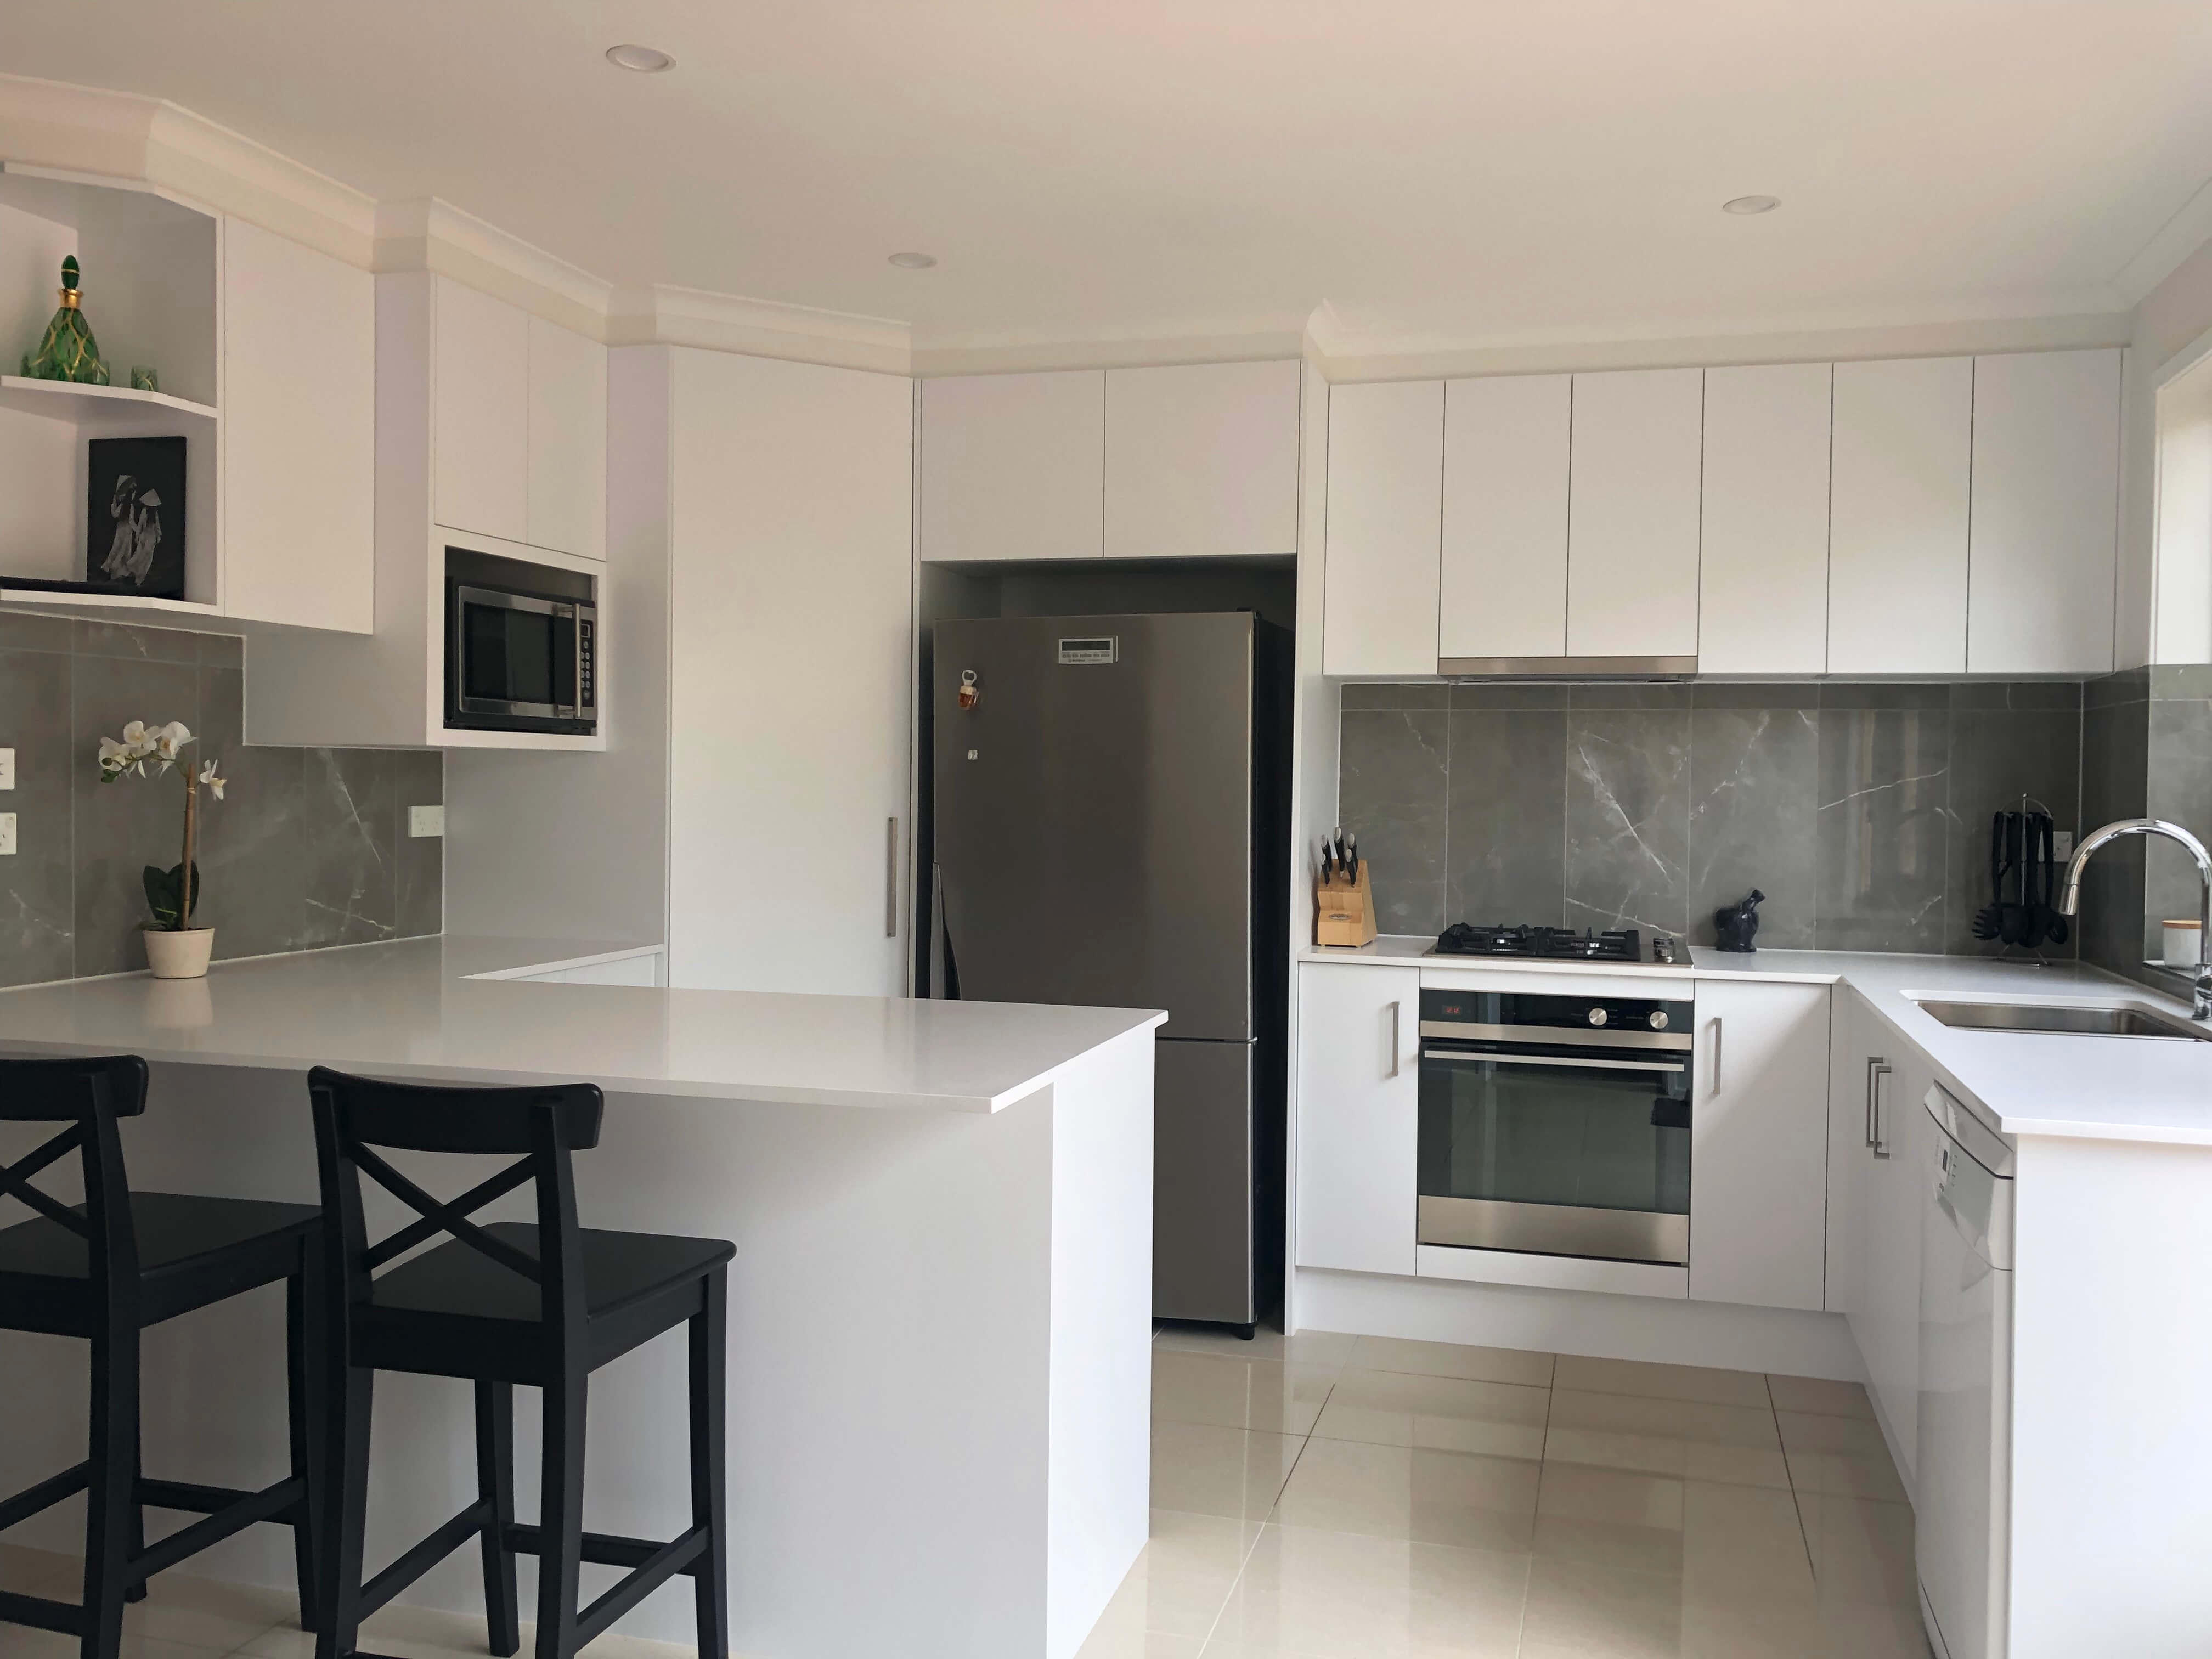 Stunning white acrylic cabinets with Caesarstone benchtops, tiled splashback and stainless steel appliances- kitchen renovation by Master Bathrooms & Kitchens.